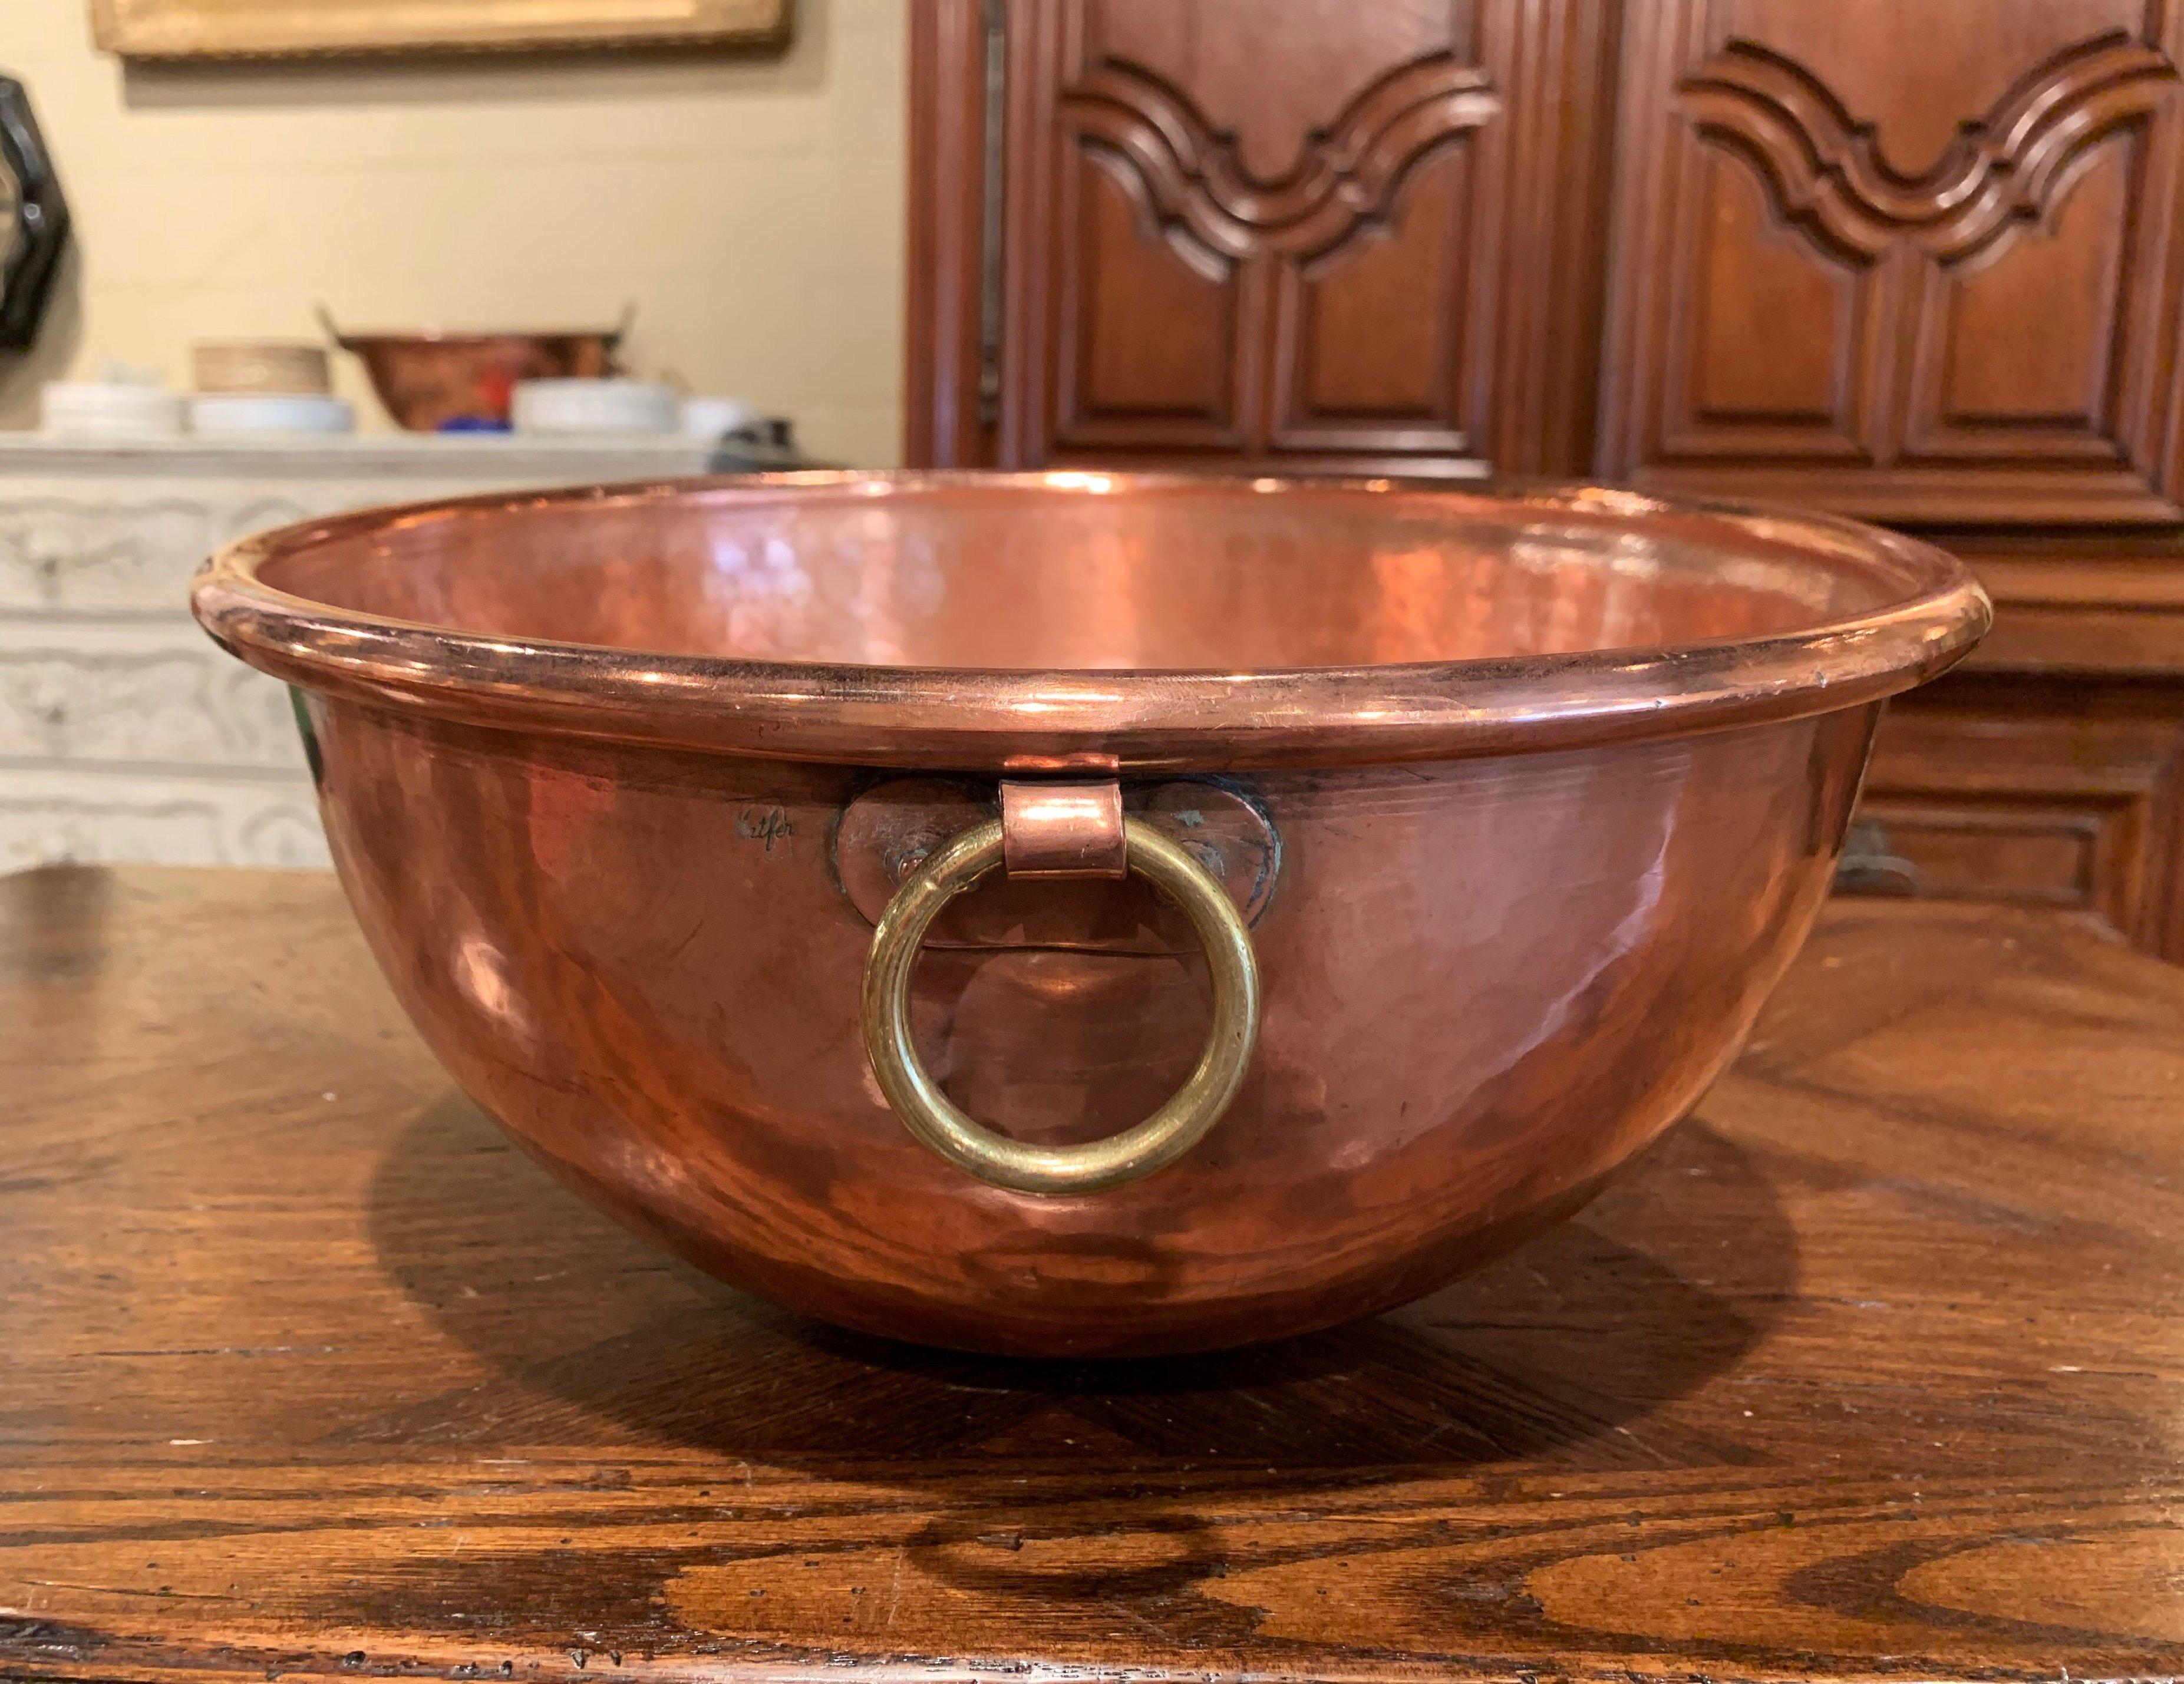 Hand-Crafted Mid-19th Century French Copper Jelly Bowl from Normandy